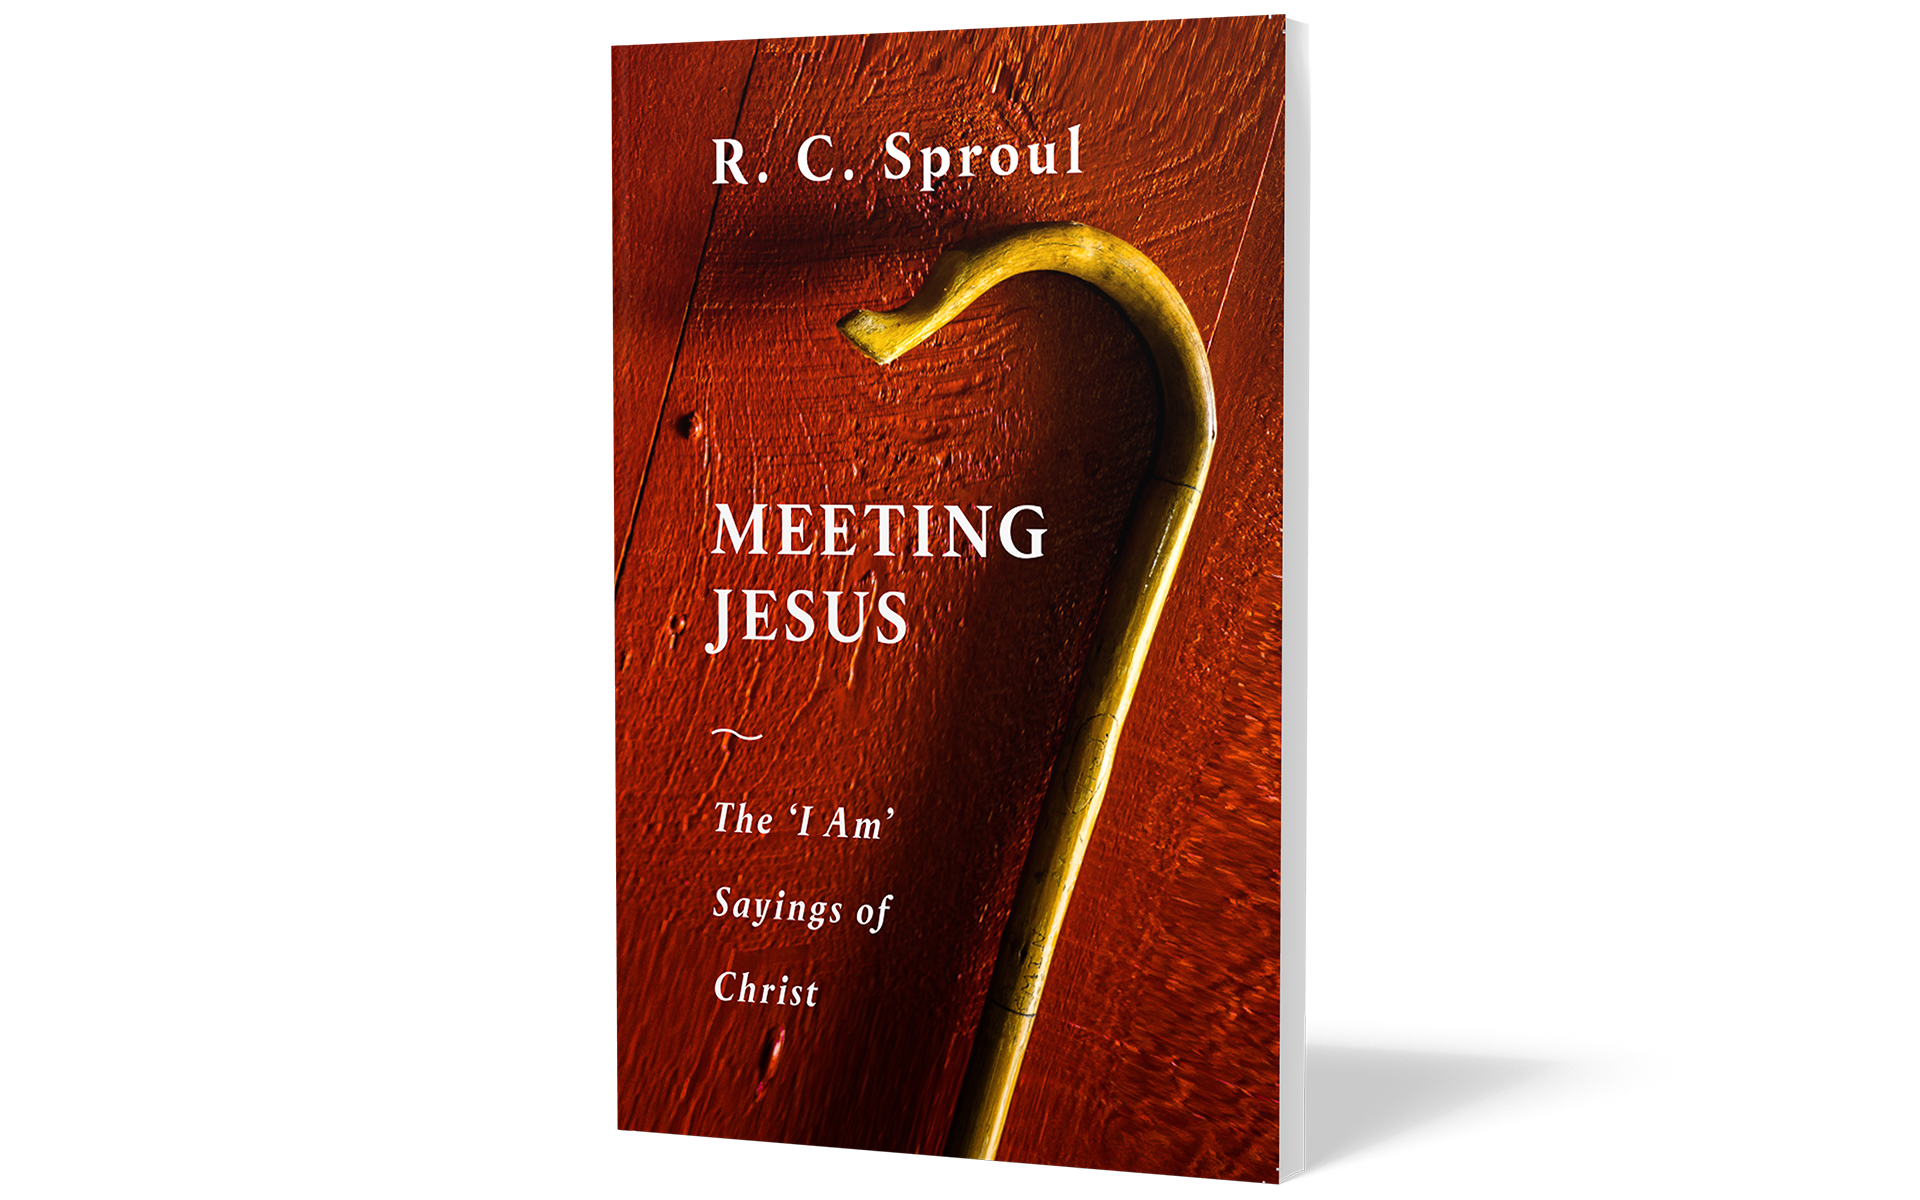 Meeting Jesus: The ‘I AM’ Sayings of Christ